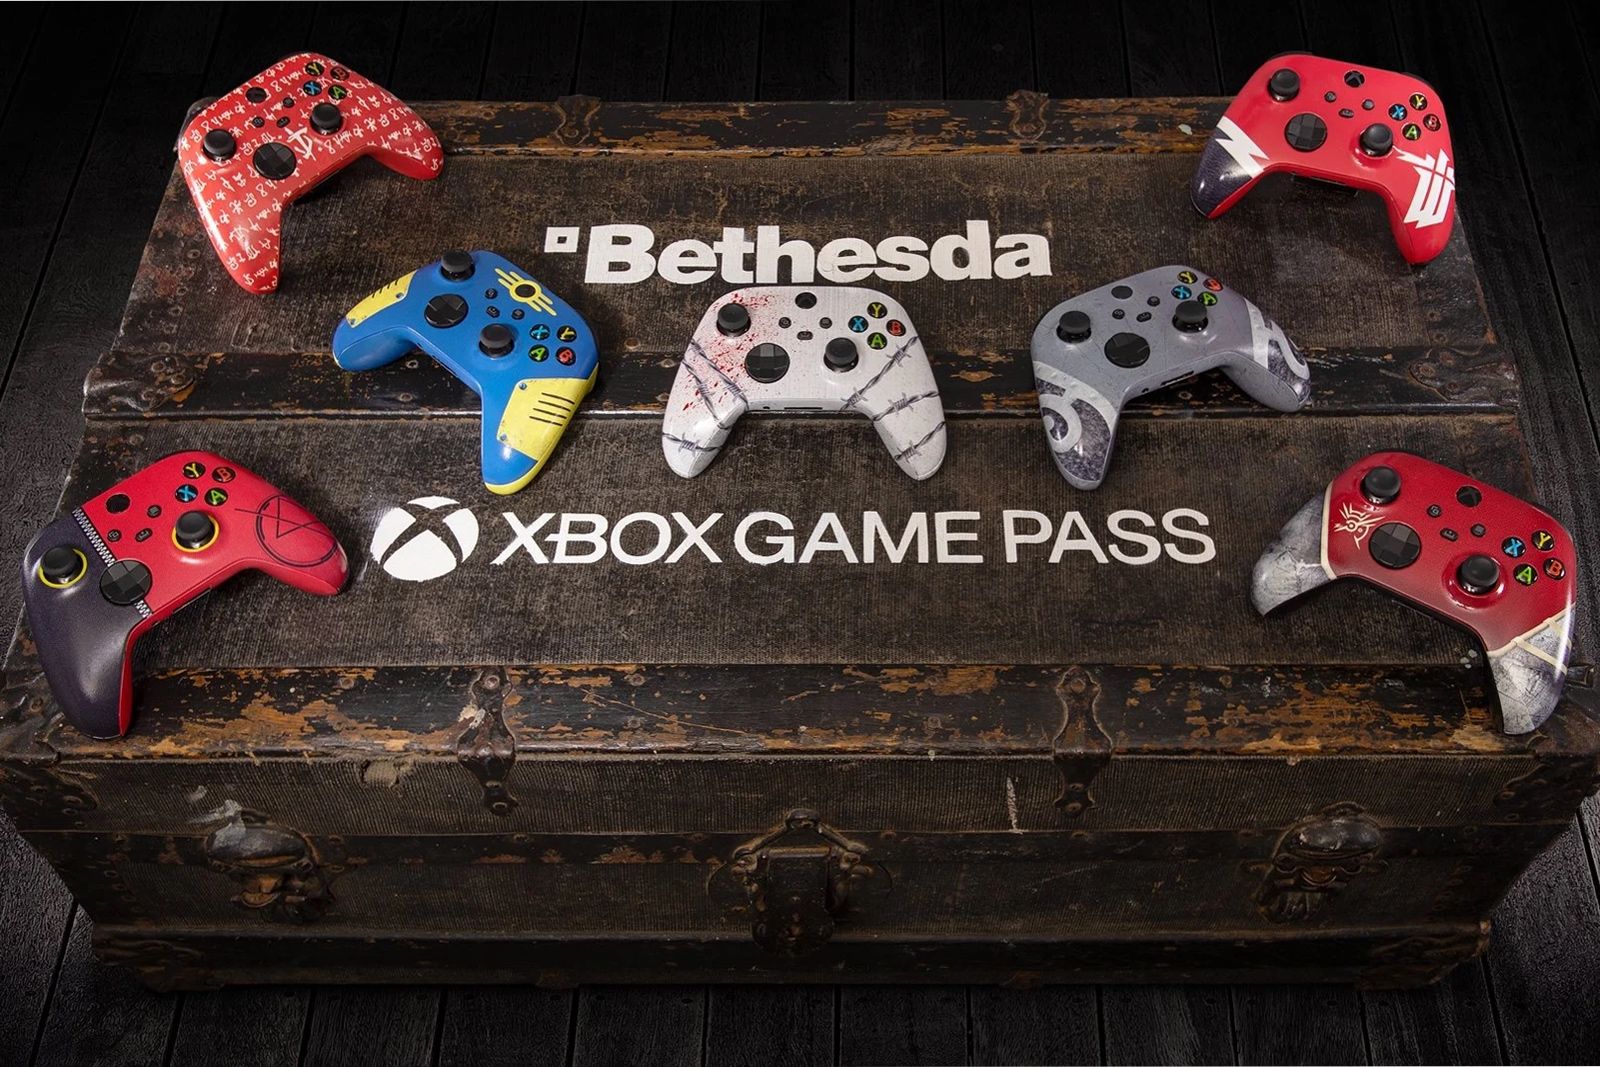 Microsoft reveals limited-edition Bethesda-themed controllers - but you'll have to be lucky to get one photo 1